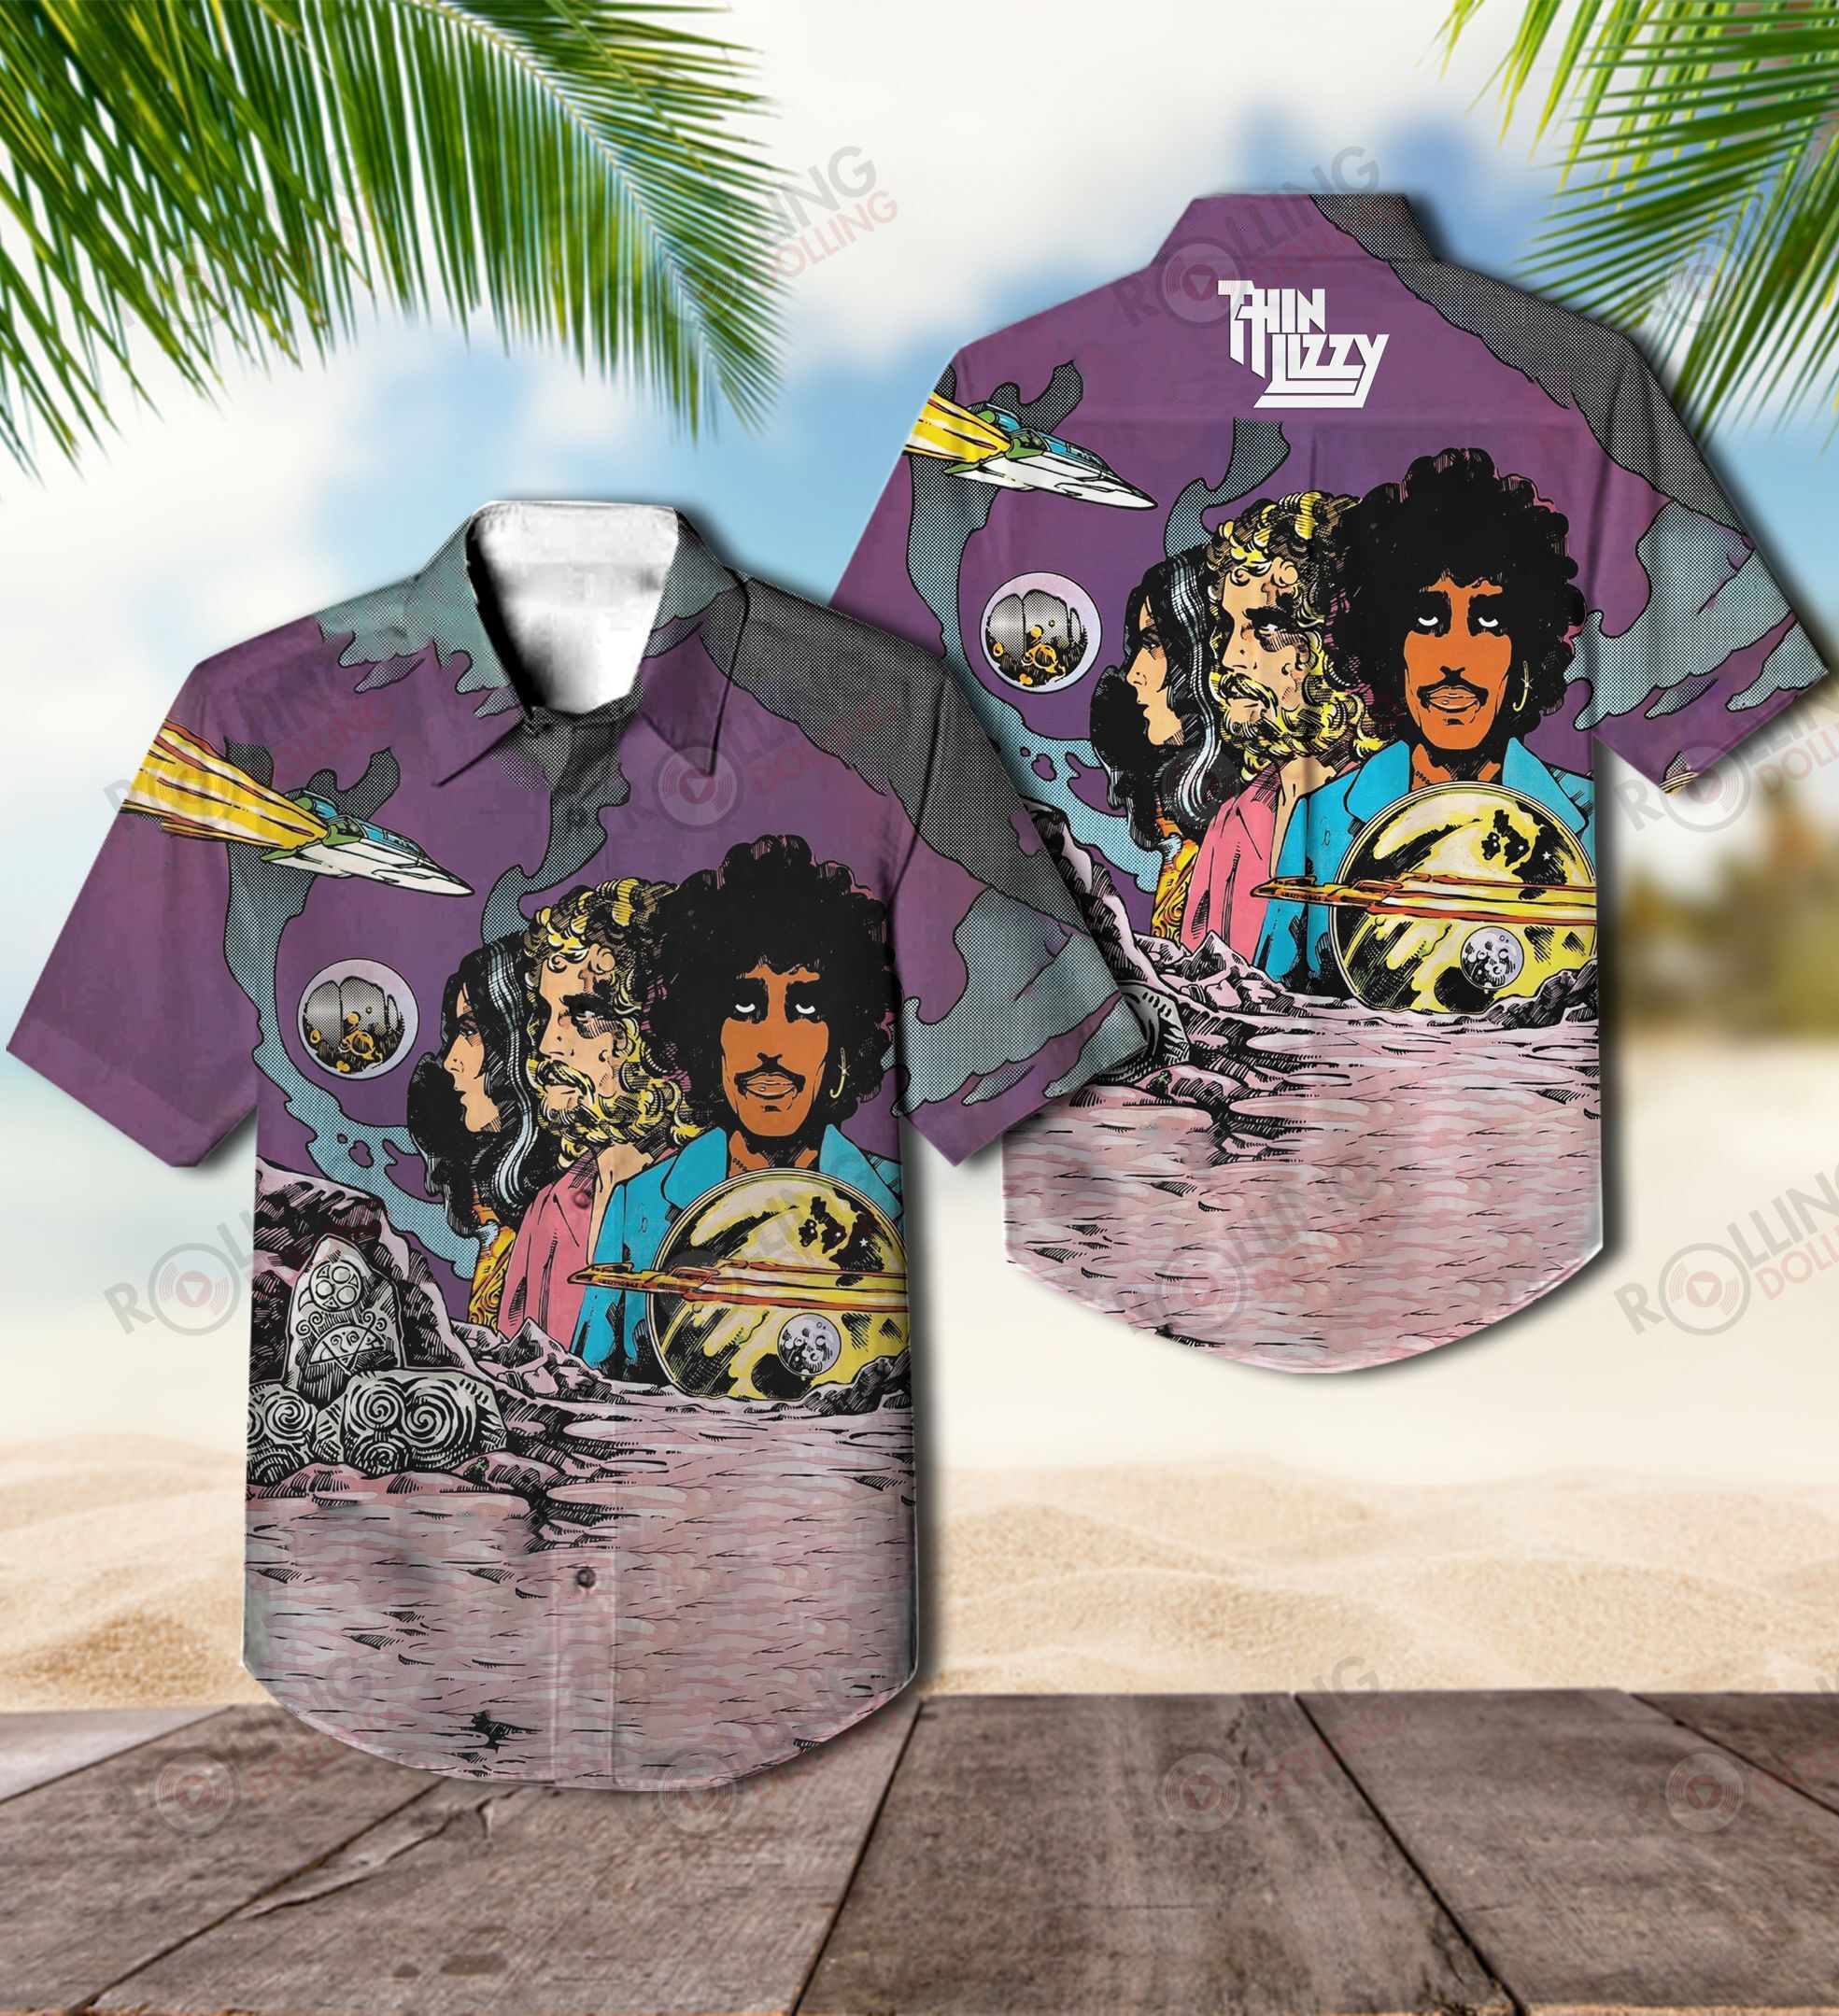 This would make a great gift for any fan who loves Hawaiian Shirt as well as Rock band 105